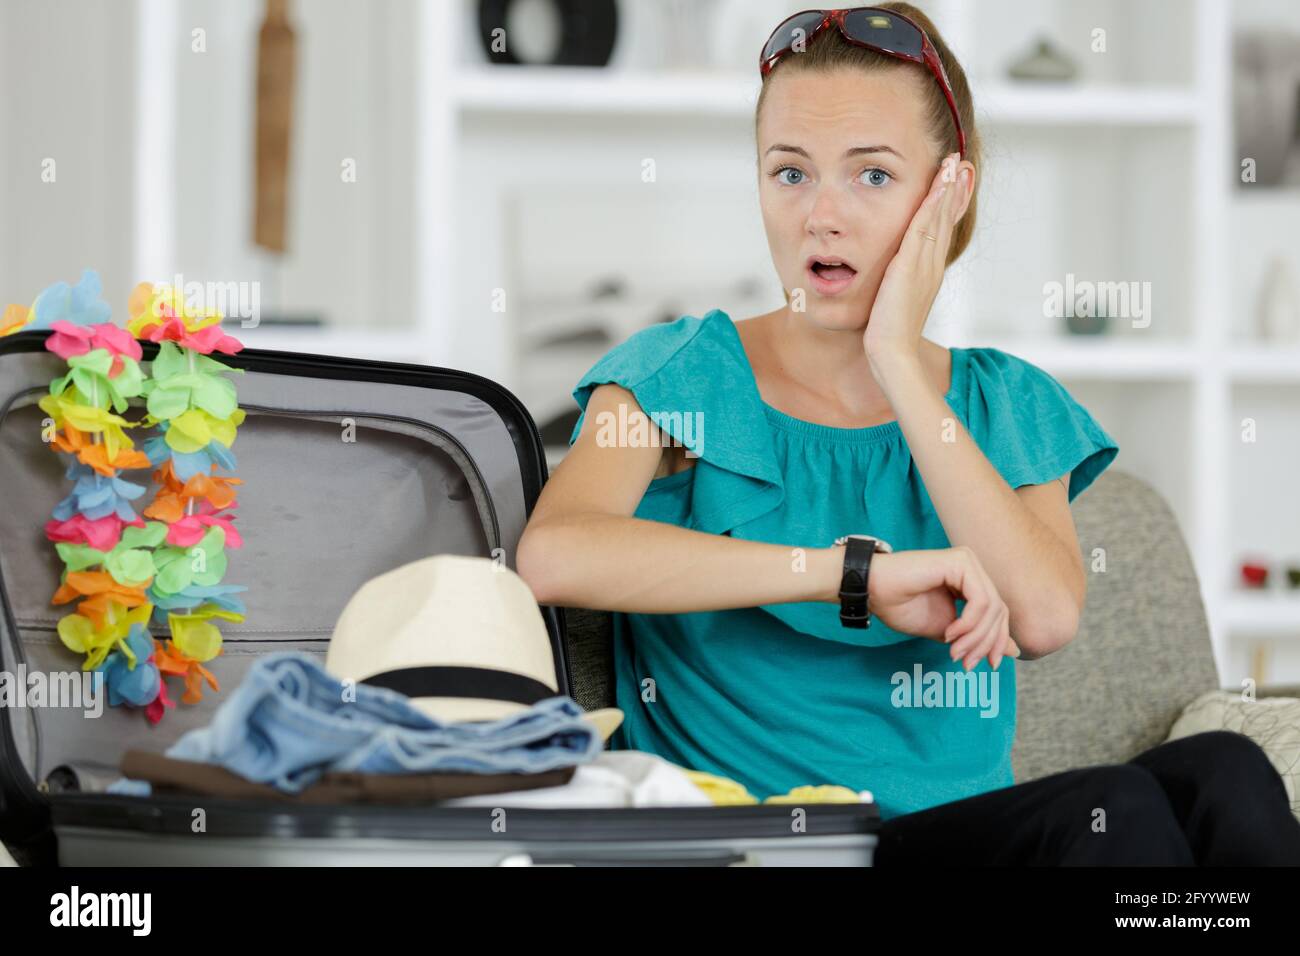 woman packing suitcase panicking as she realises the time Stock Photo